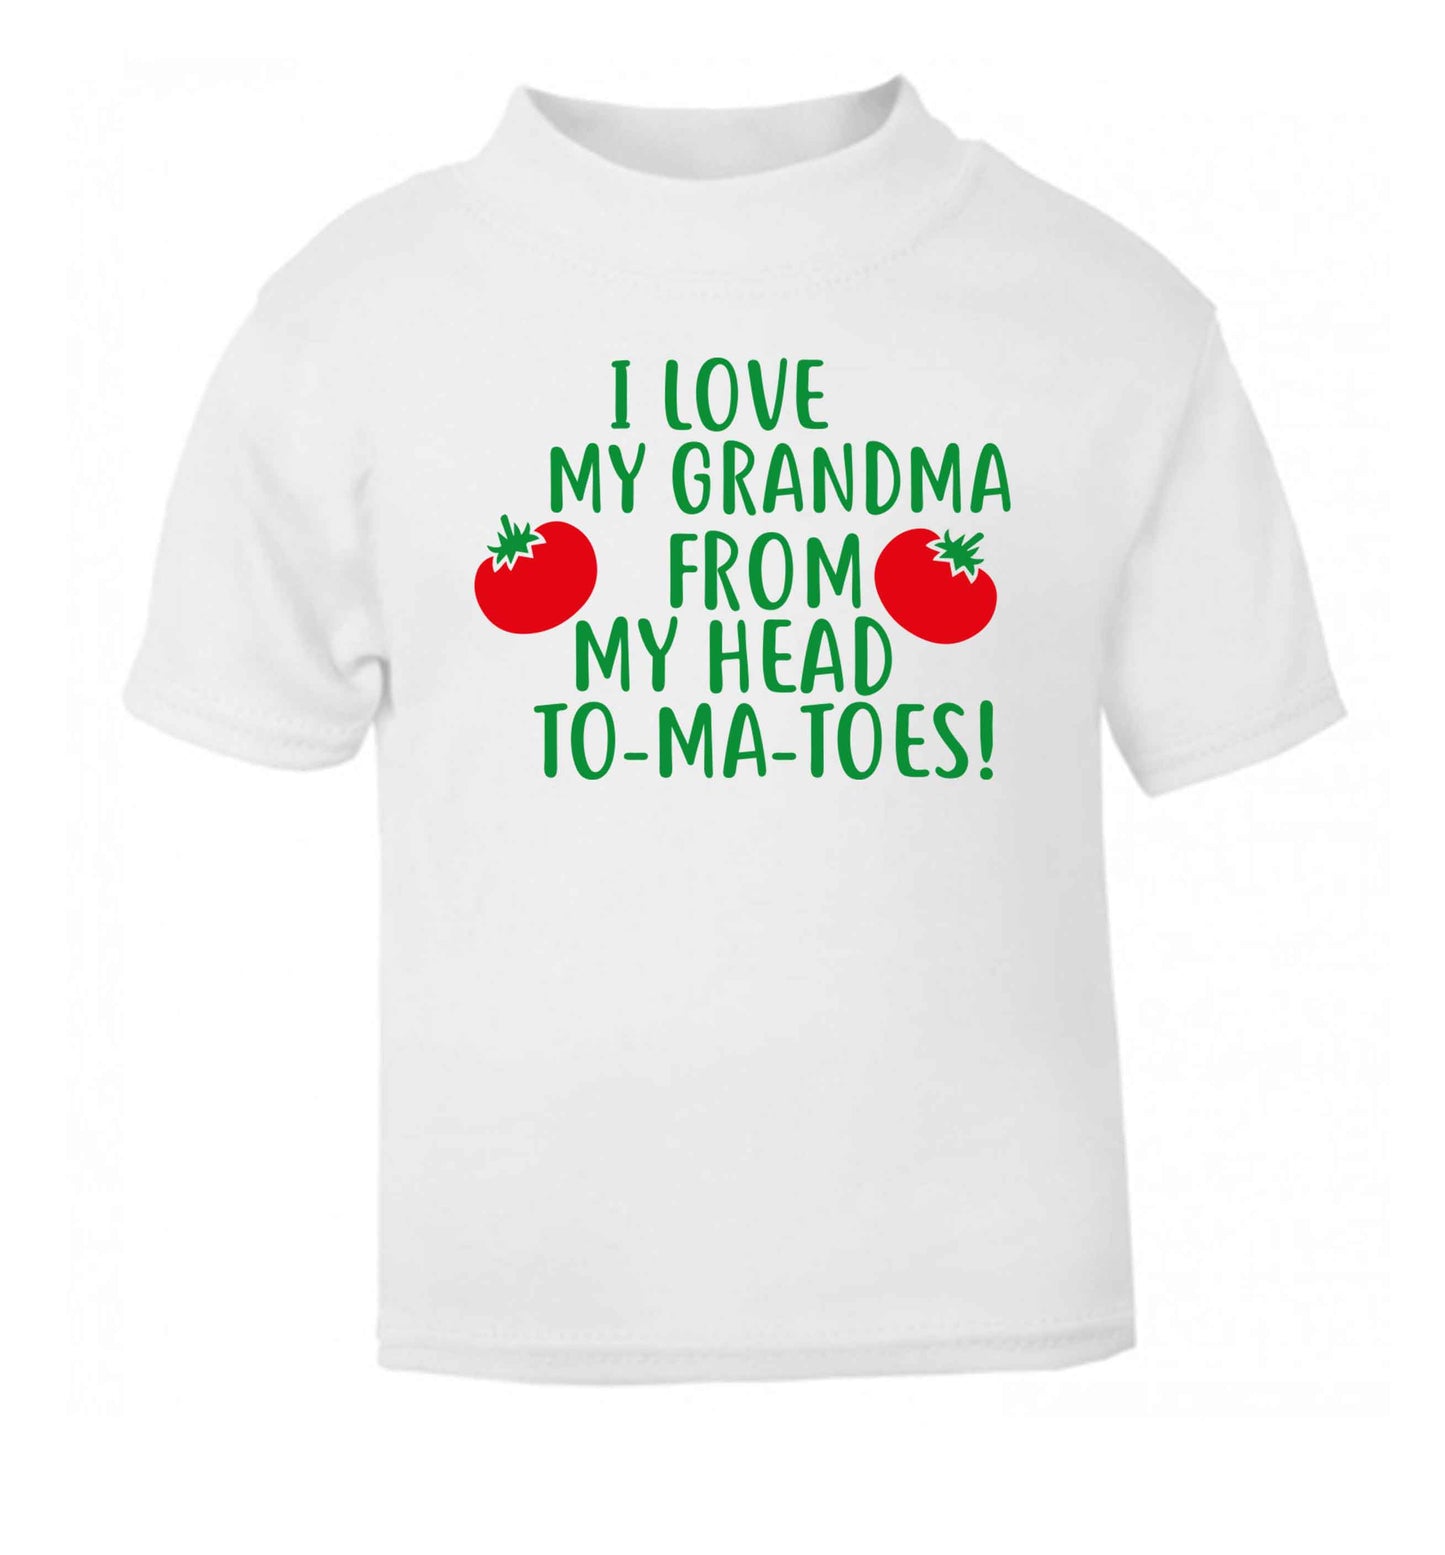 I love my grandma from my head to-ma-toes white Baby Toddler Tshirt 2 Years